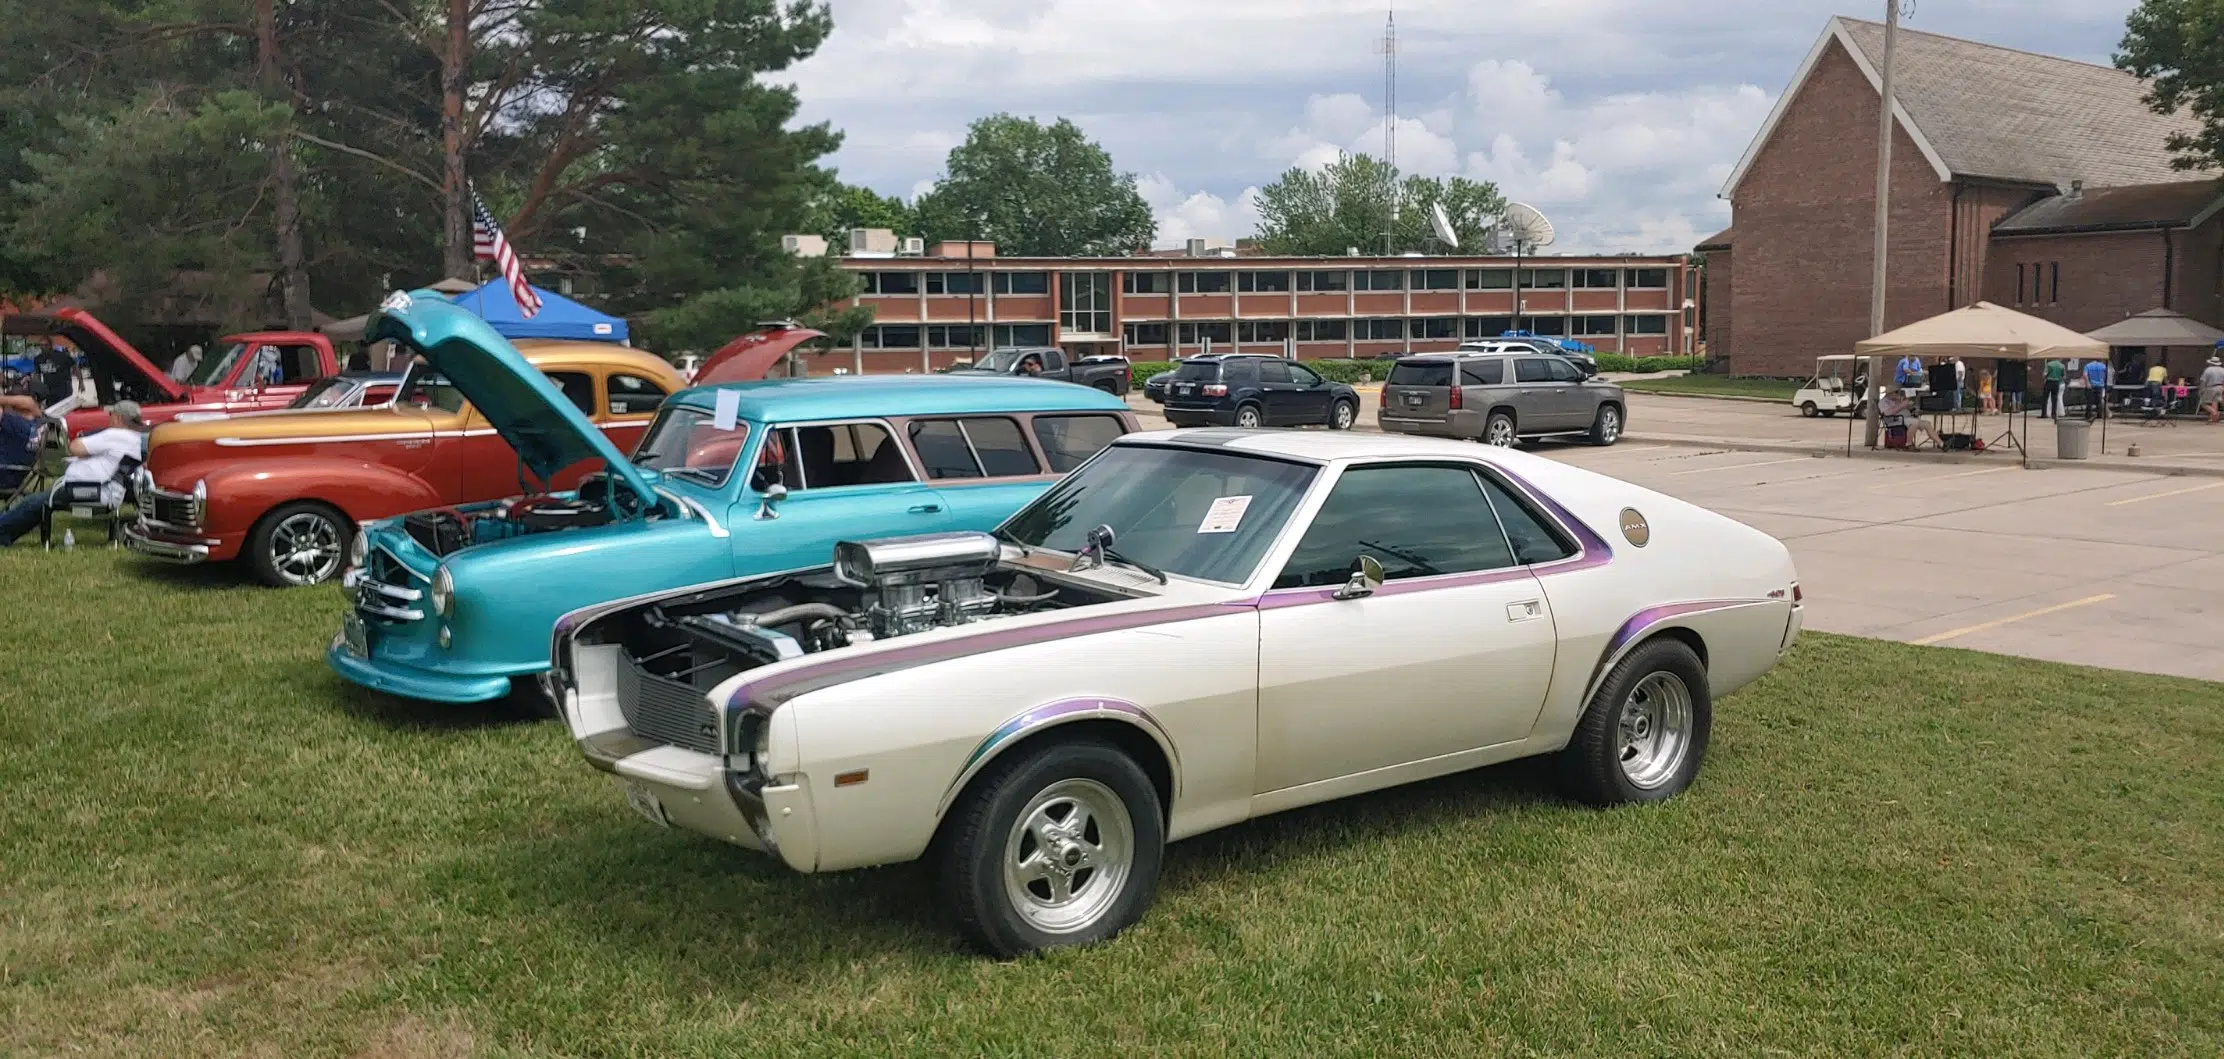 St. Mark's Lutheran Church hosting second annual Rod'n for JC Vehicle Show Sunday afternoon